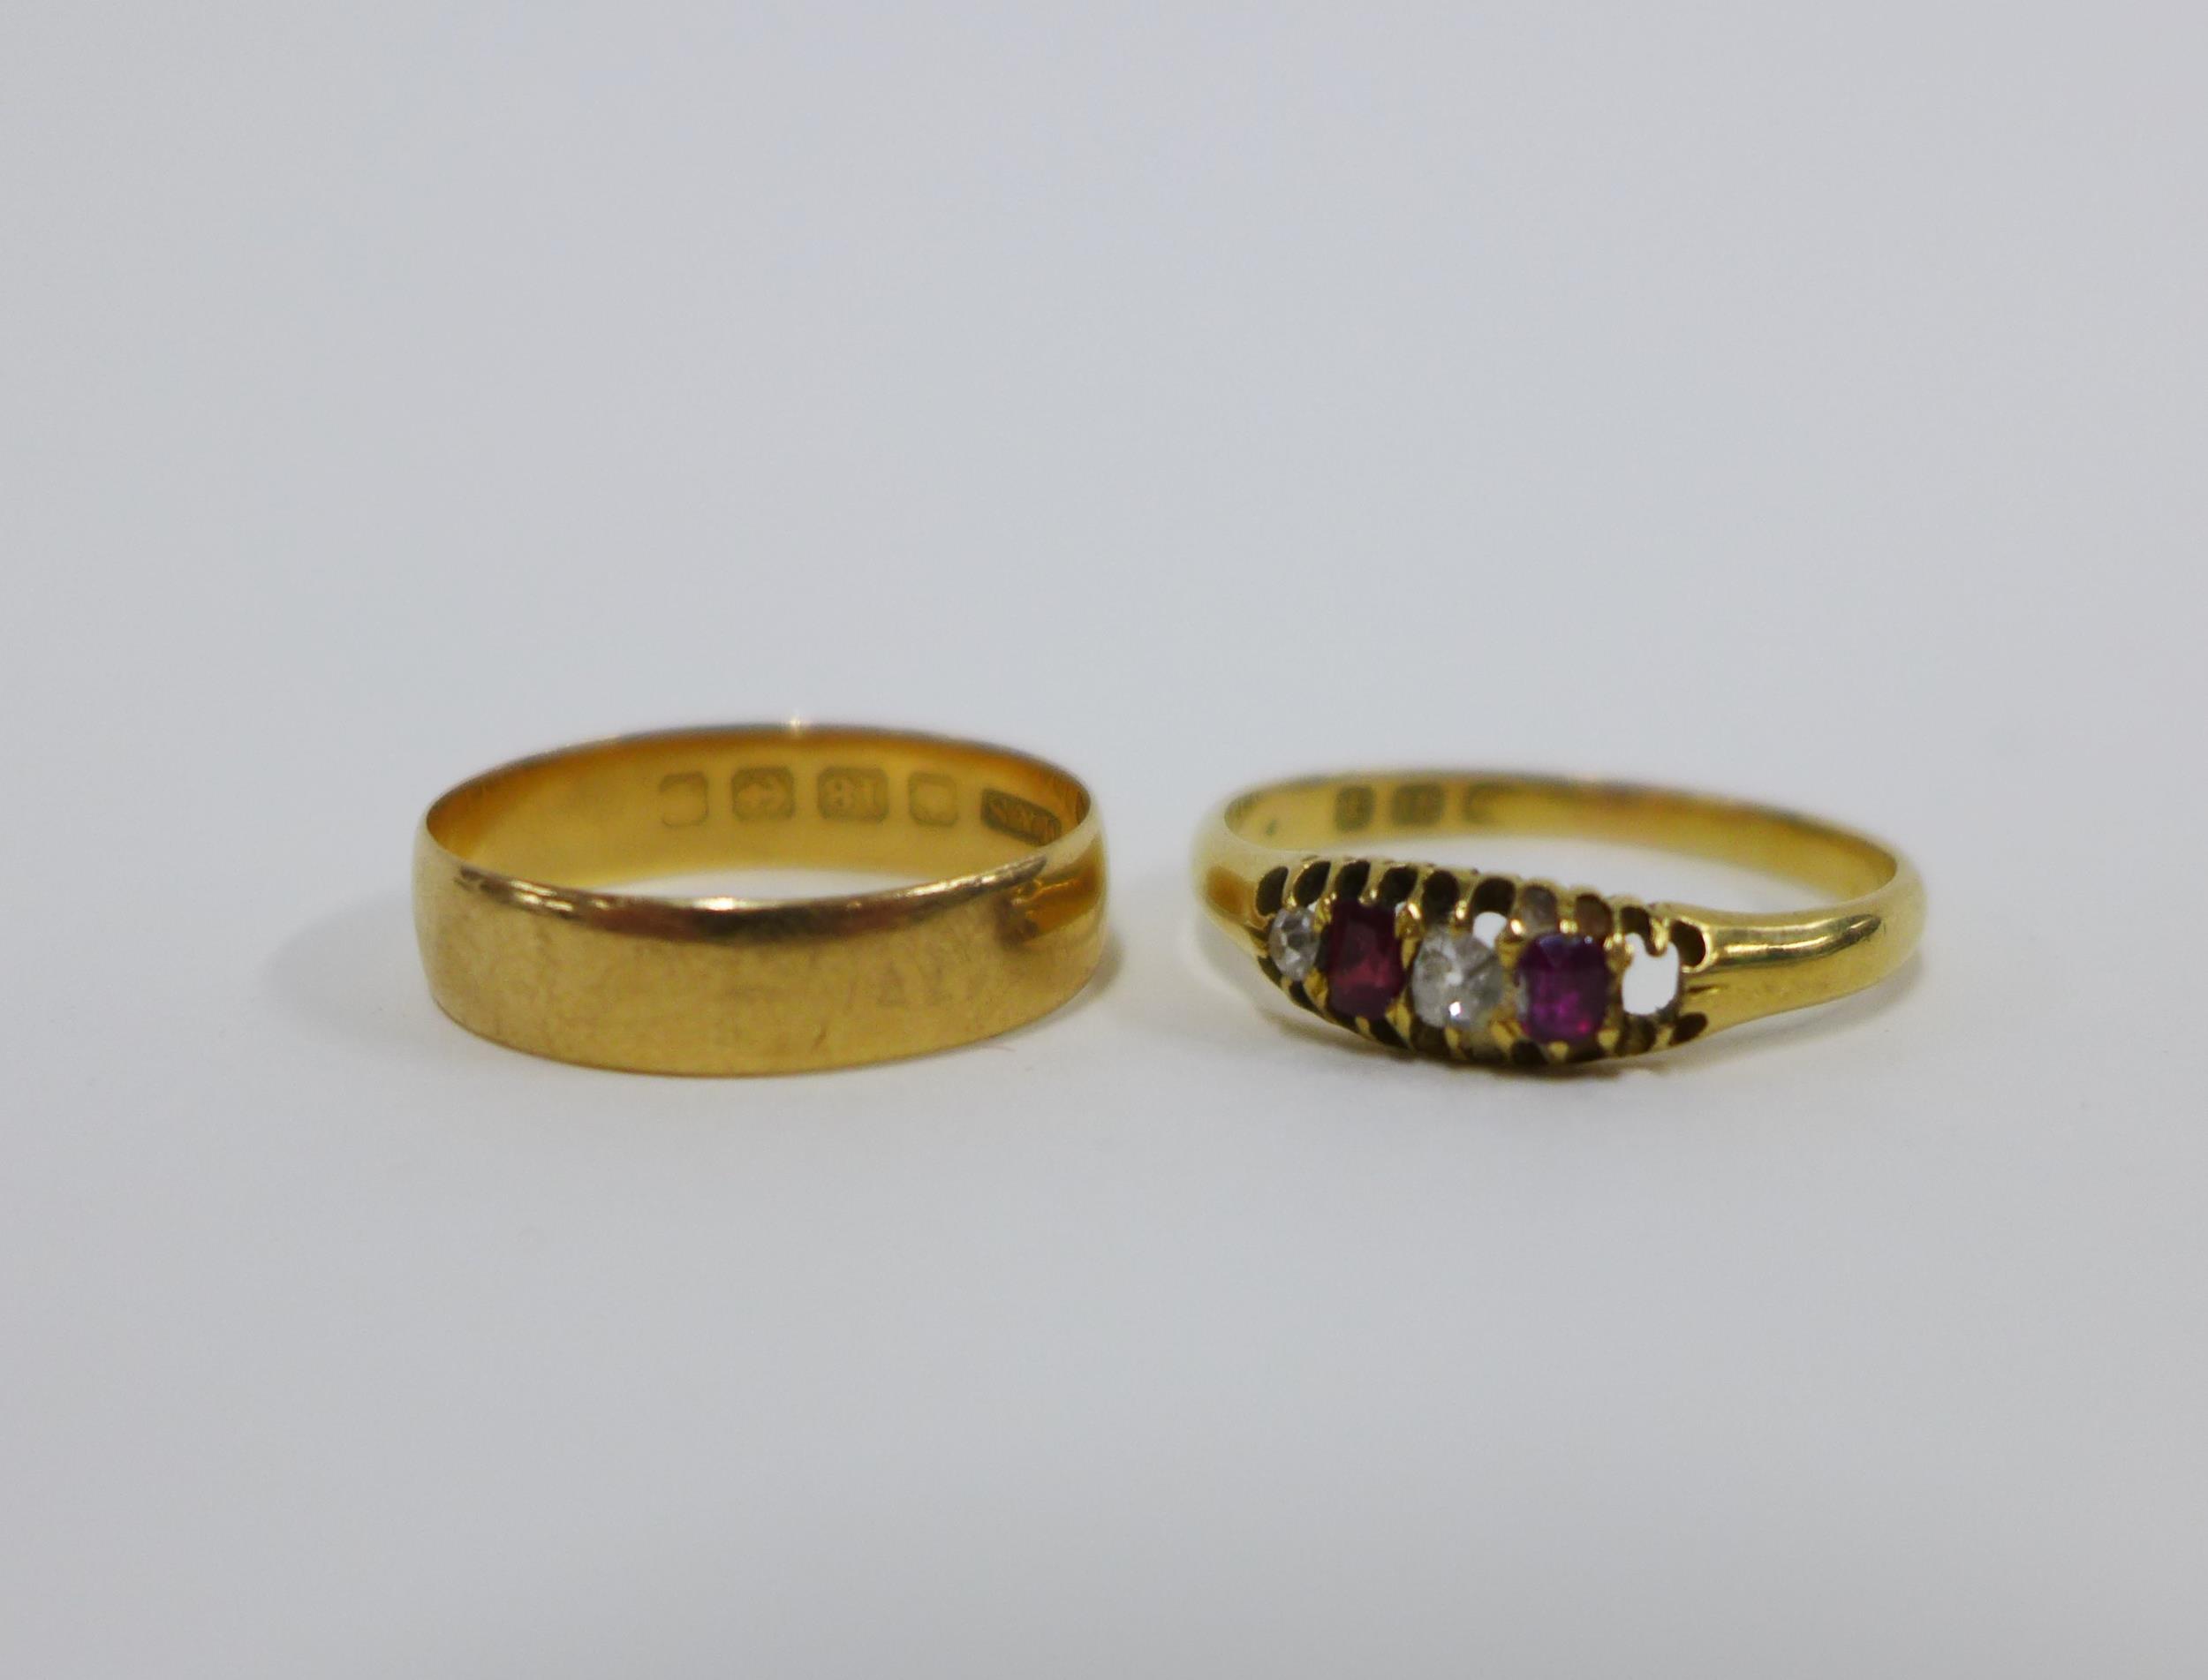 18ct gold wedding band and an 18ct gold diamond and ruby ring (one stone lacking) (2)